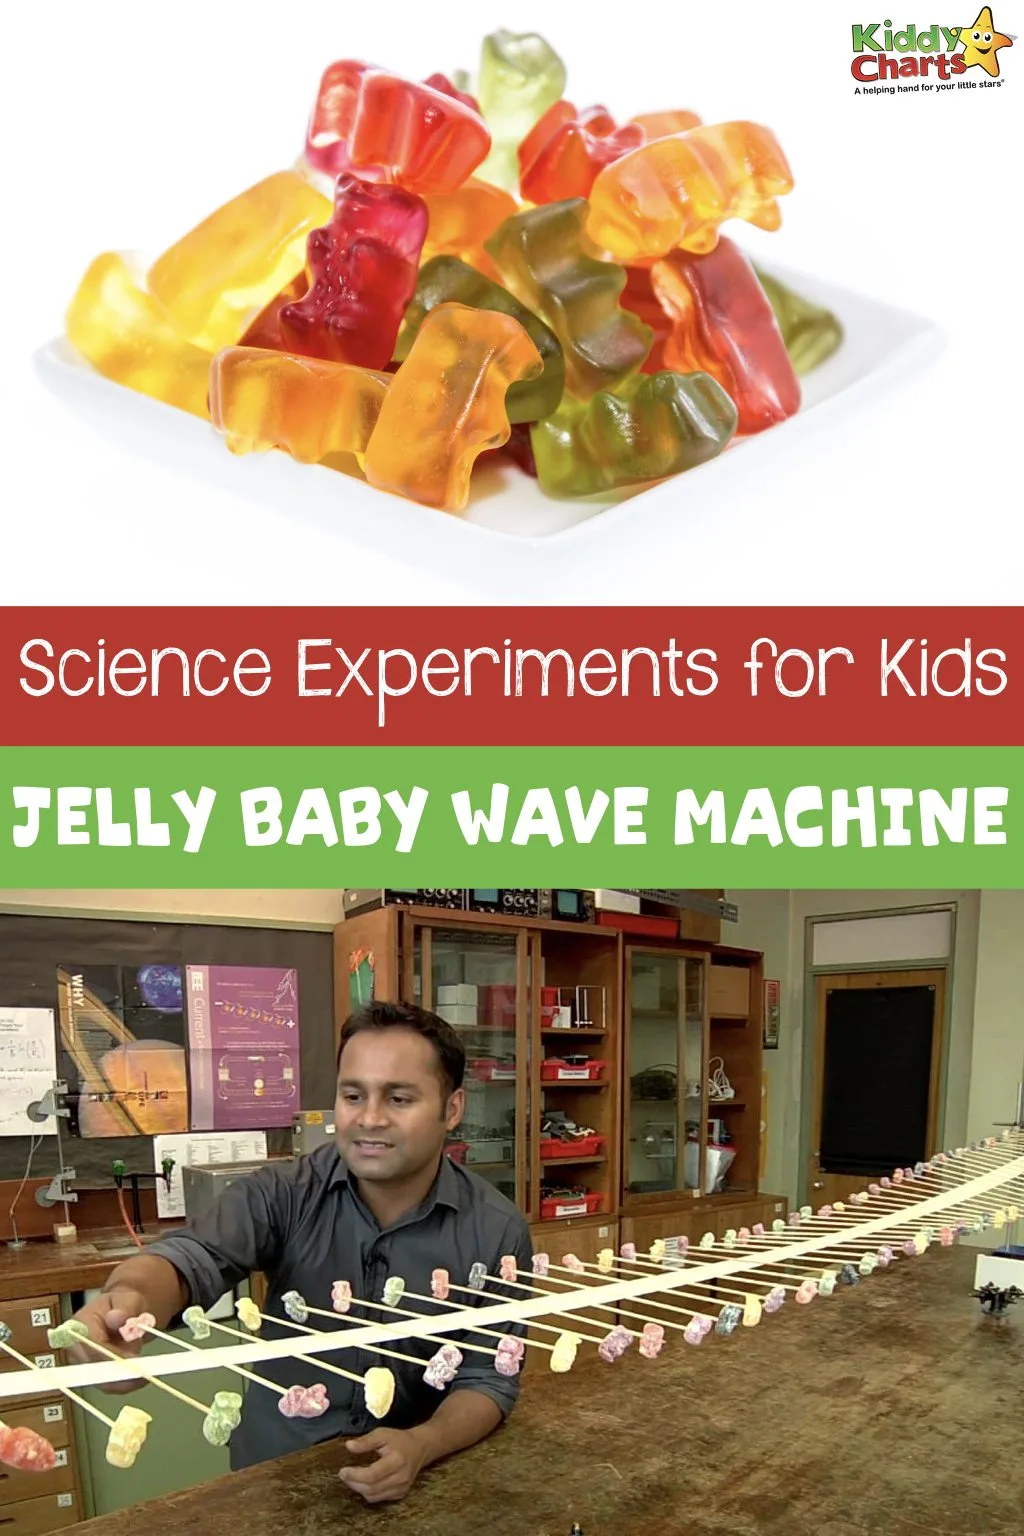 Are you looking for fun science experiments for kids? Mr Shaha's Recipes For Wonder has 5 fun activities to do with kids that explore the wonderful science. Today I would like to share Jelly baby wave machine, a recipe for wonder from Mr Shaha.